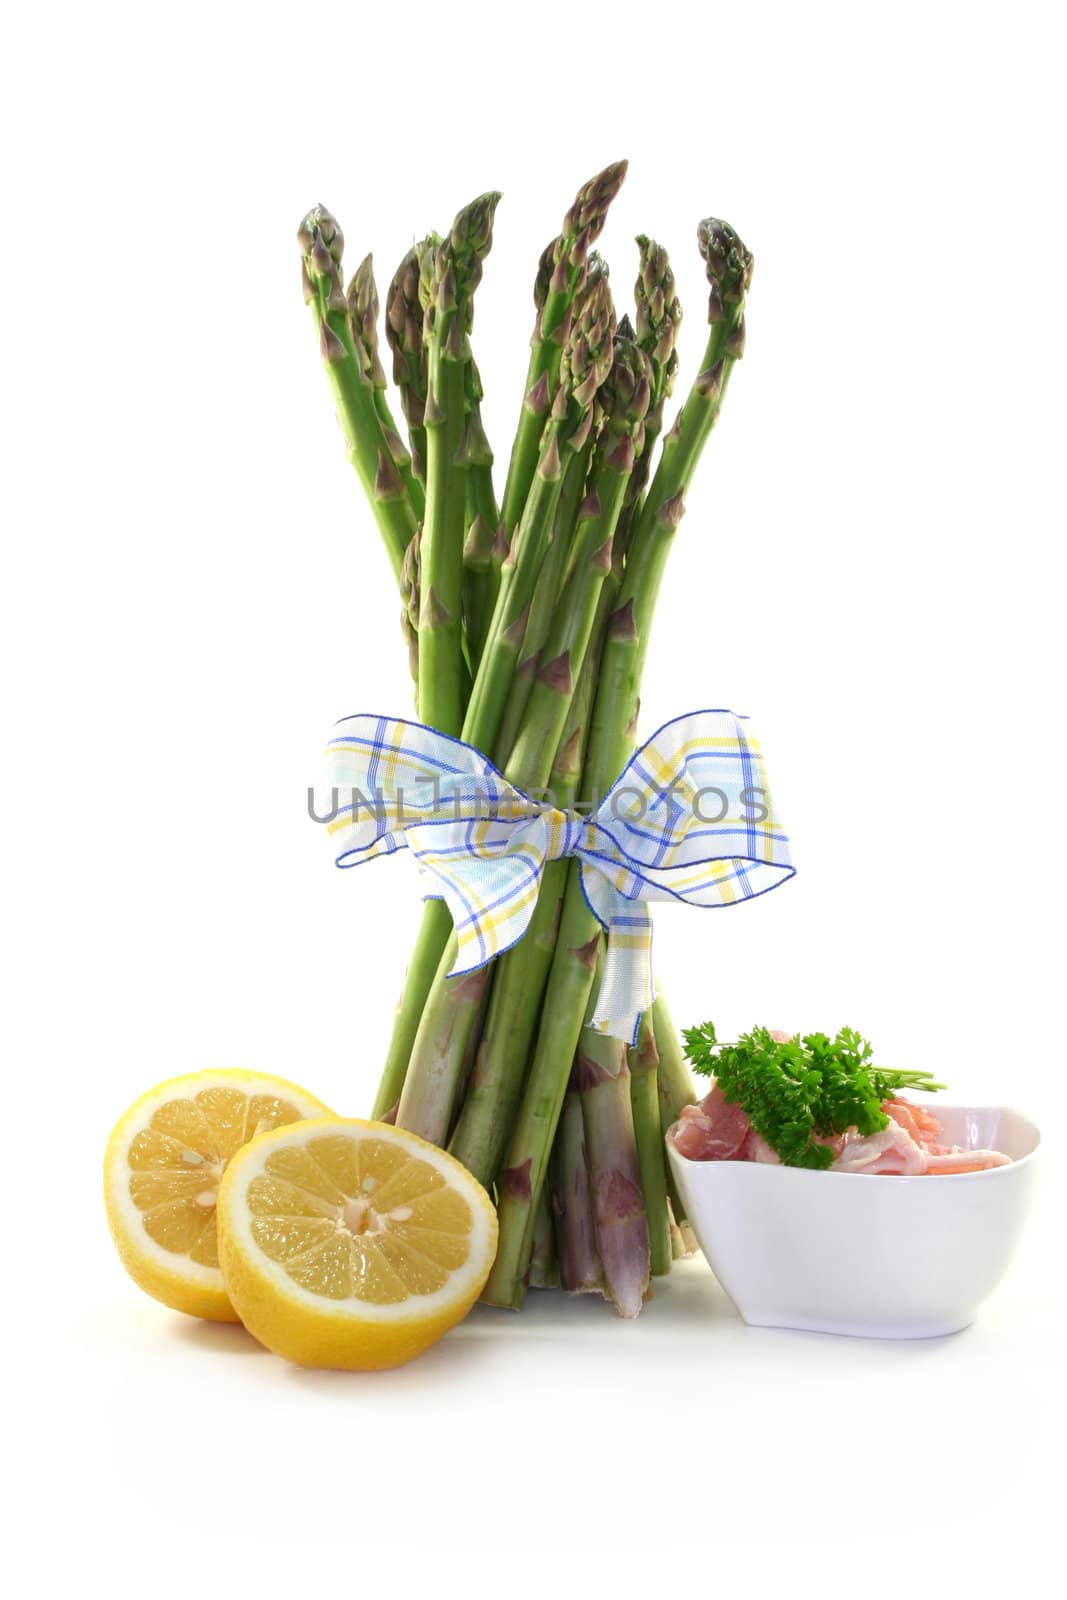 a bundle of green asparagus with lemon and ham